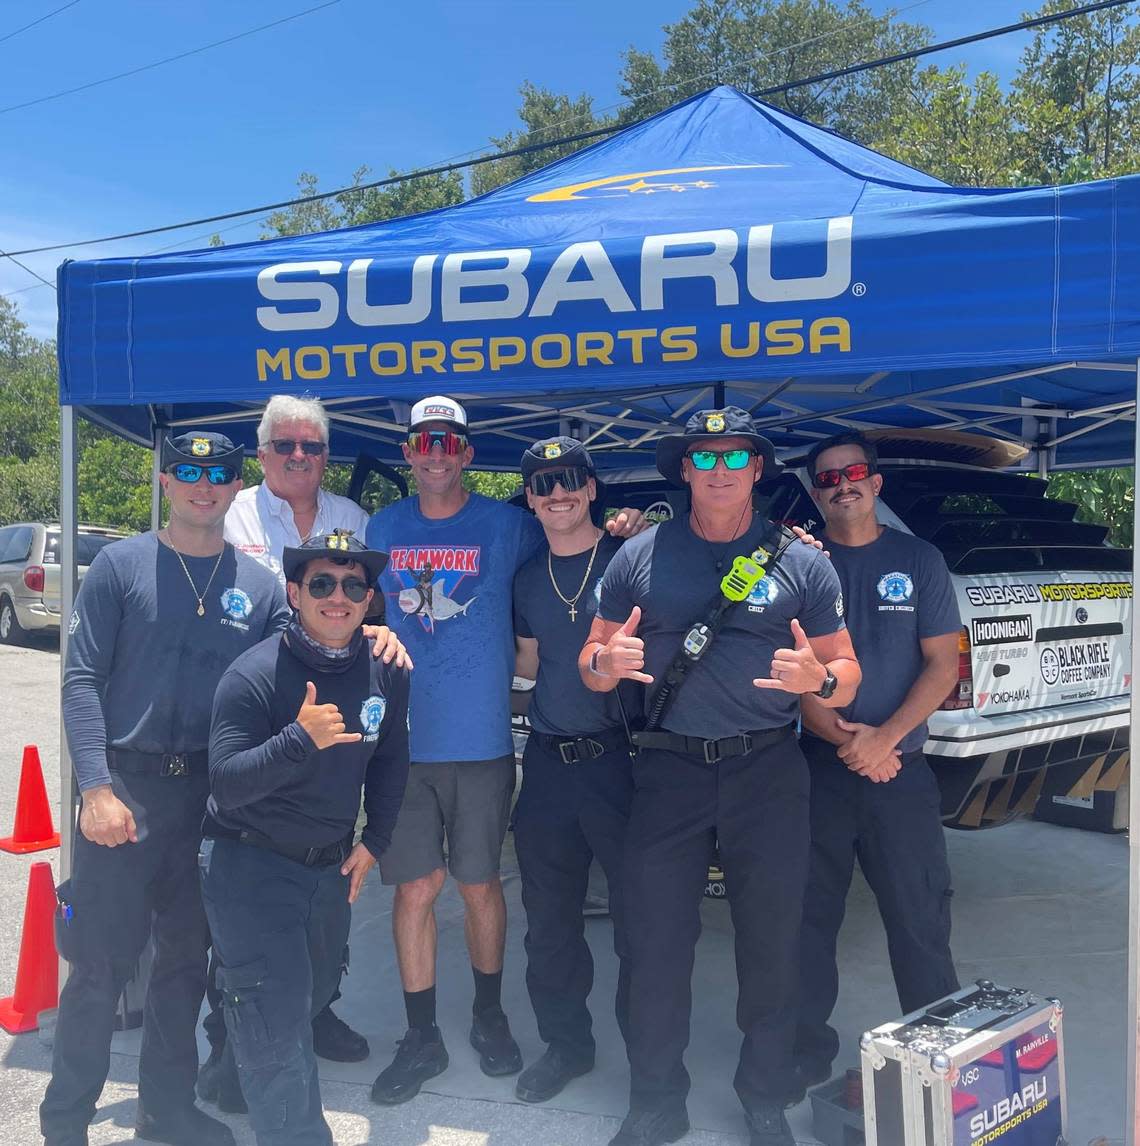 Travis Pastrana, third from left in the back row, poses with Marathon Fire Rescue staff including Chief John Johnson and Deputy Chief Cameron Bucek, who were on hand for the July 11,2022, stunt jump at Boot Key Bridge.